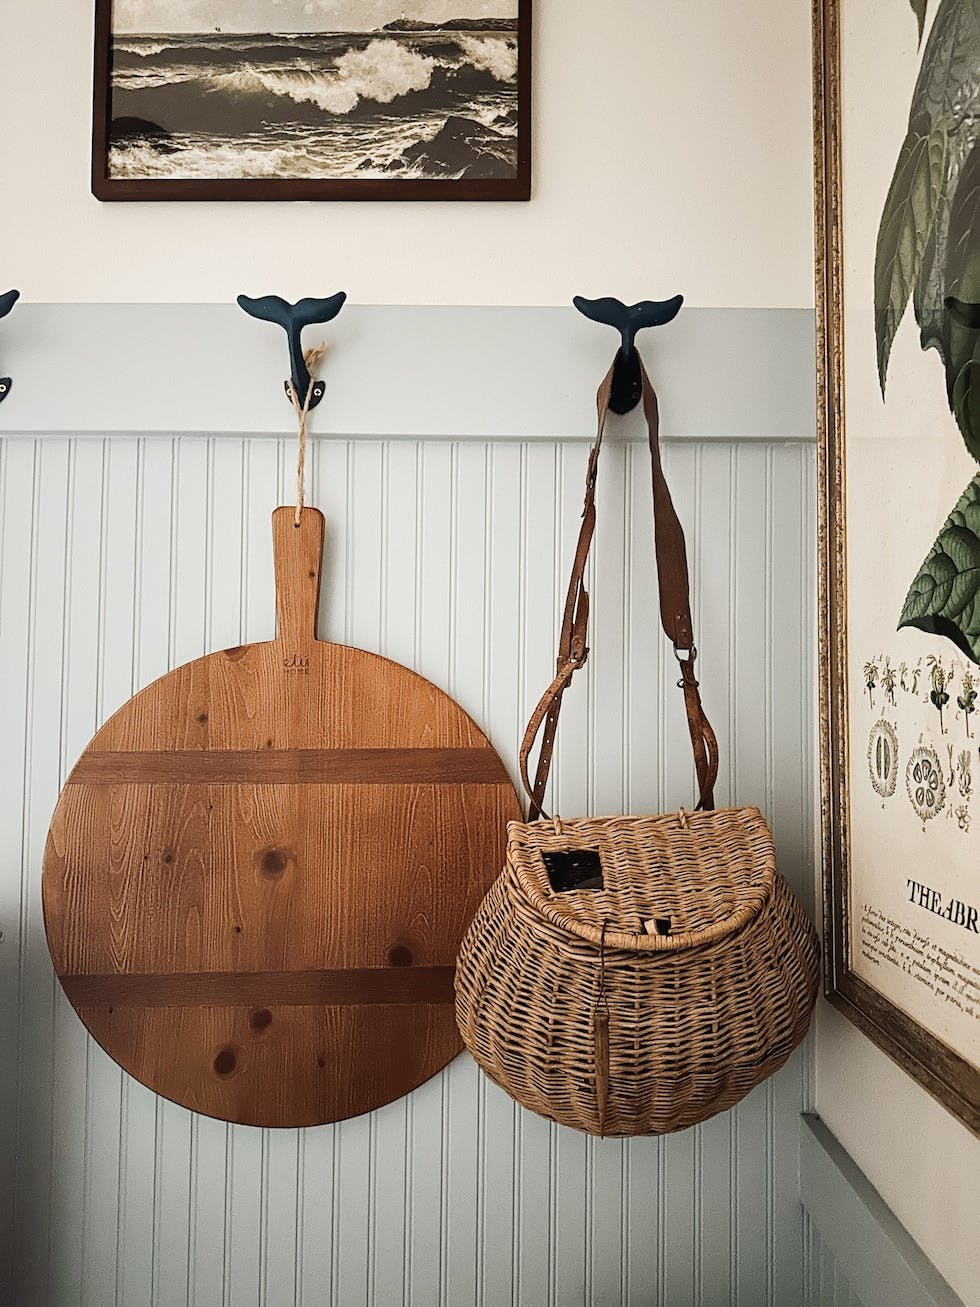 Cover Image for Decorating with Fishing Baskets